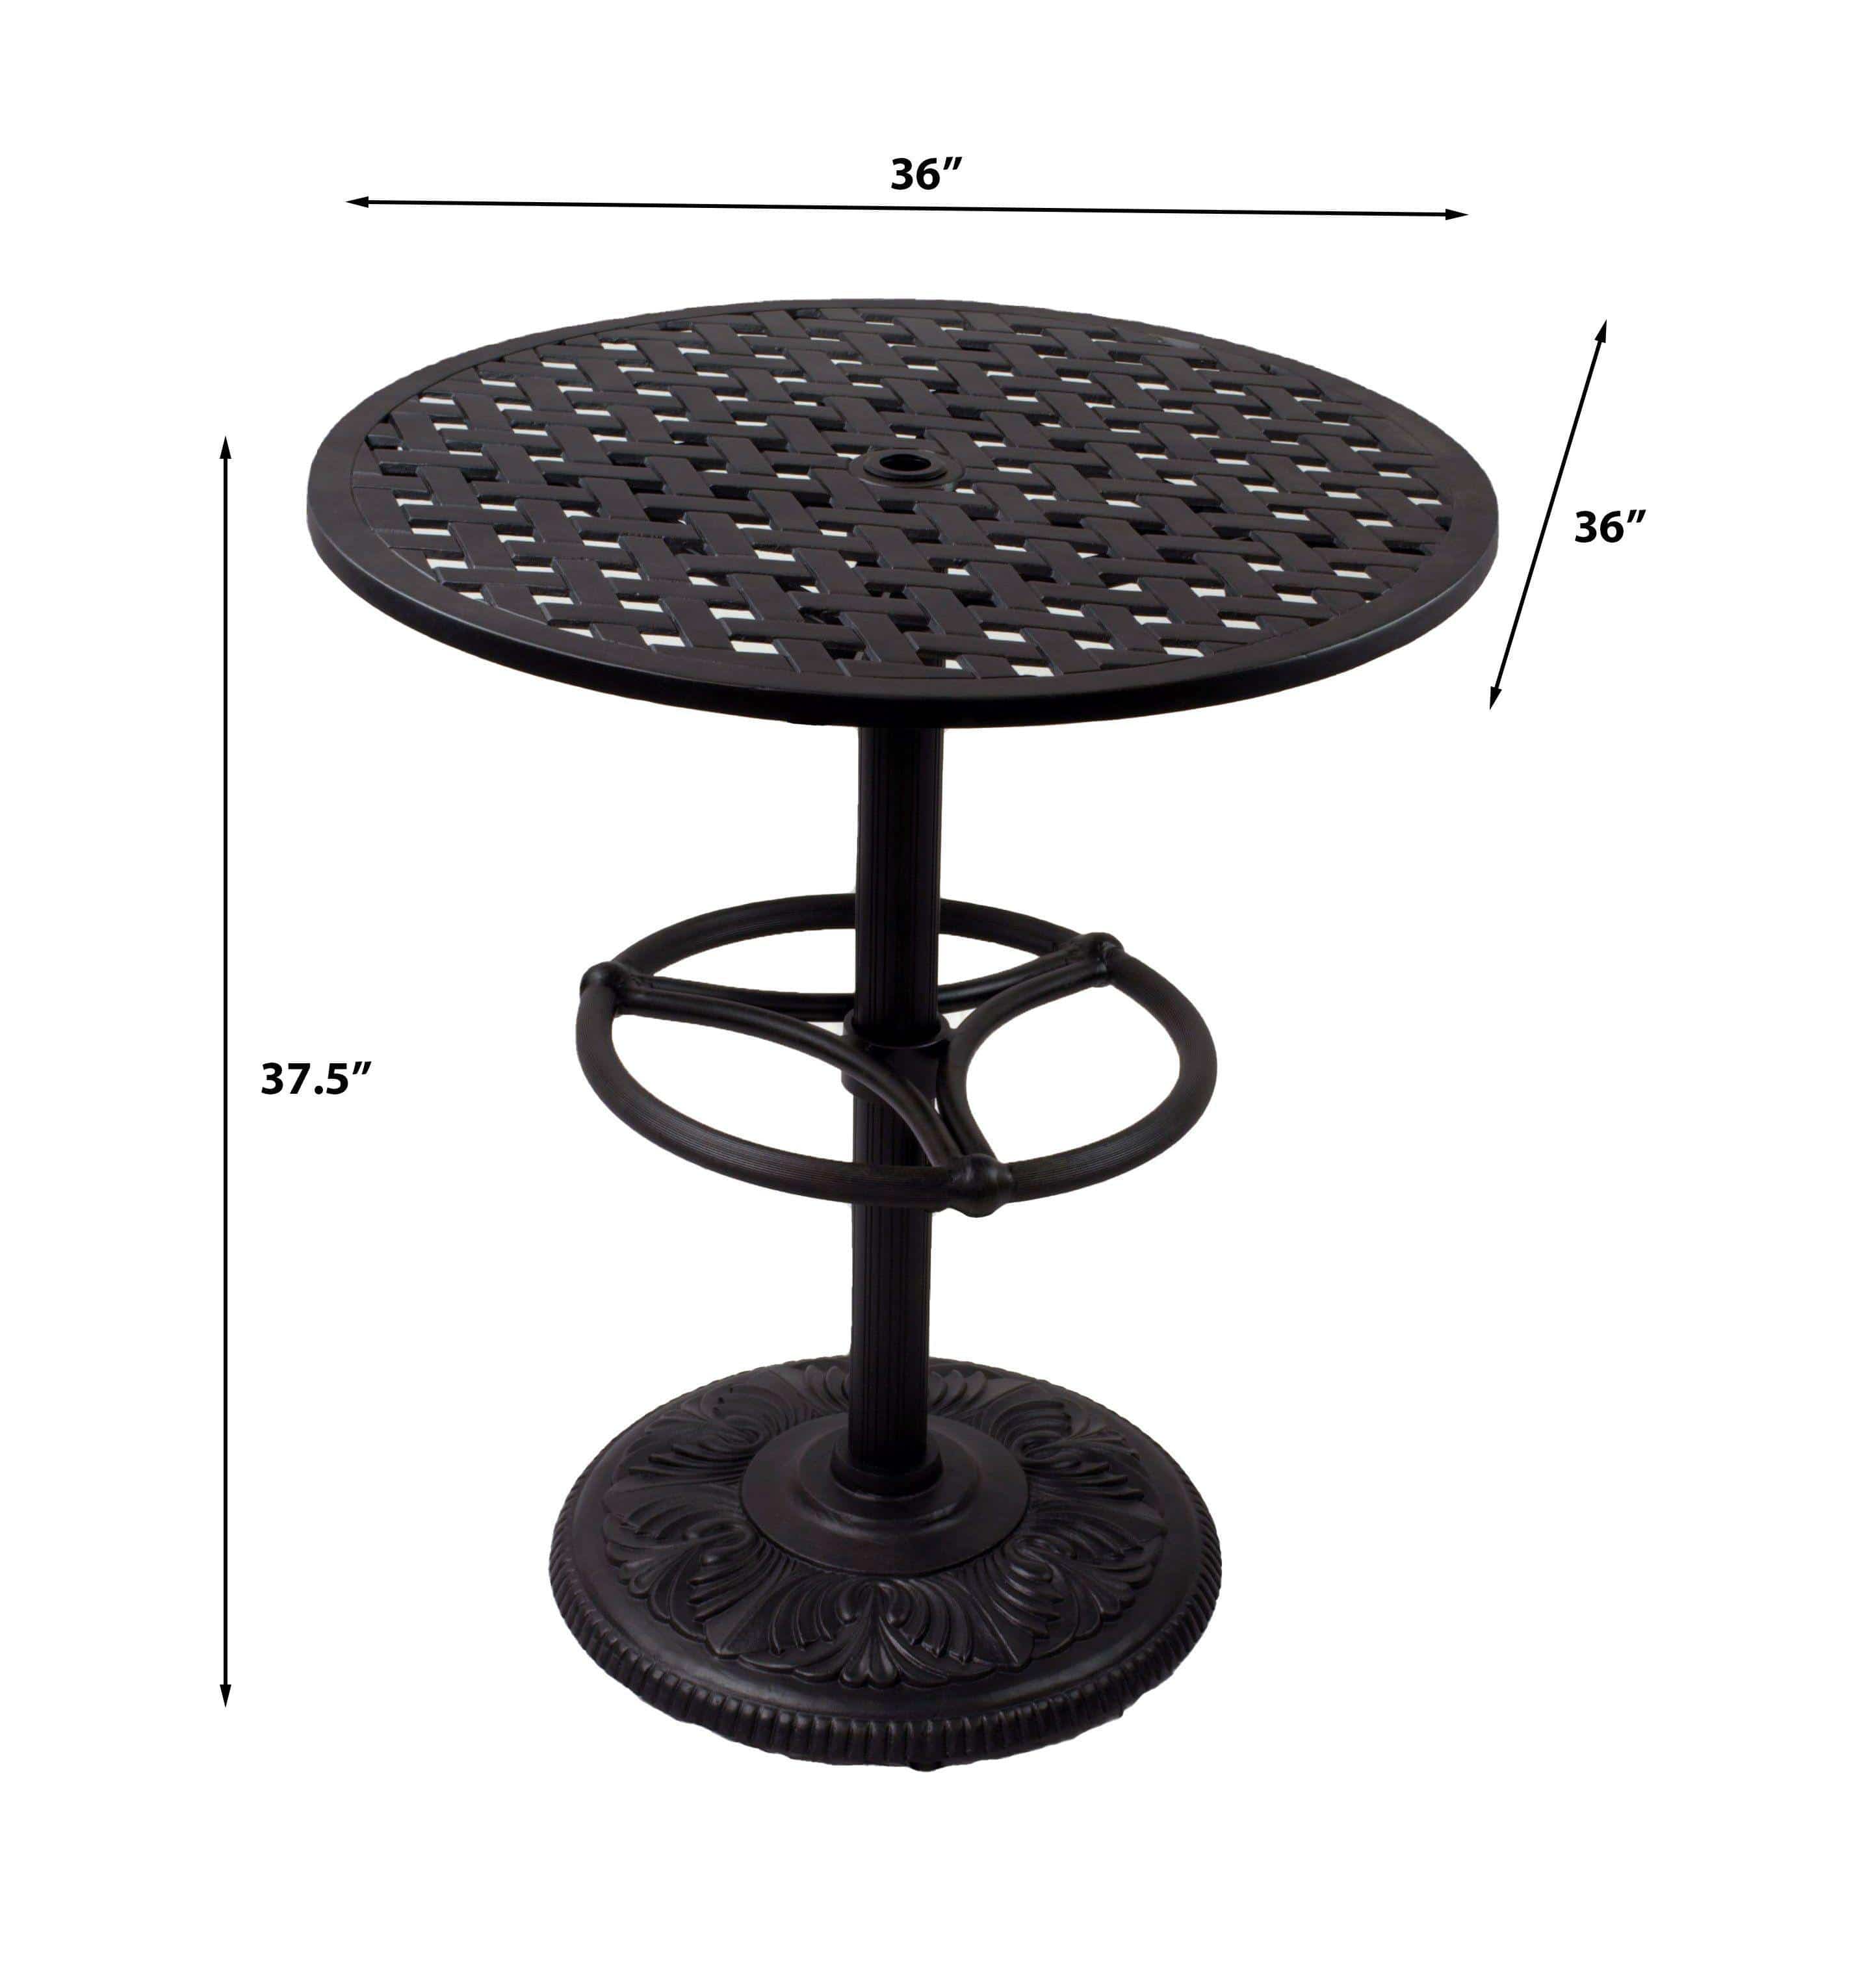 Lawton Casual Comfort Outdoor Dining Table Lawton Casual Comfort - 36" Round Pedstal Bar Table Weave With Footrest